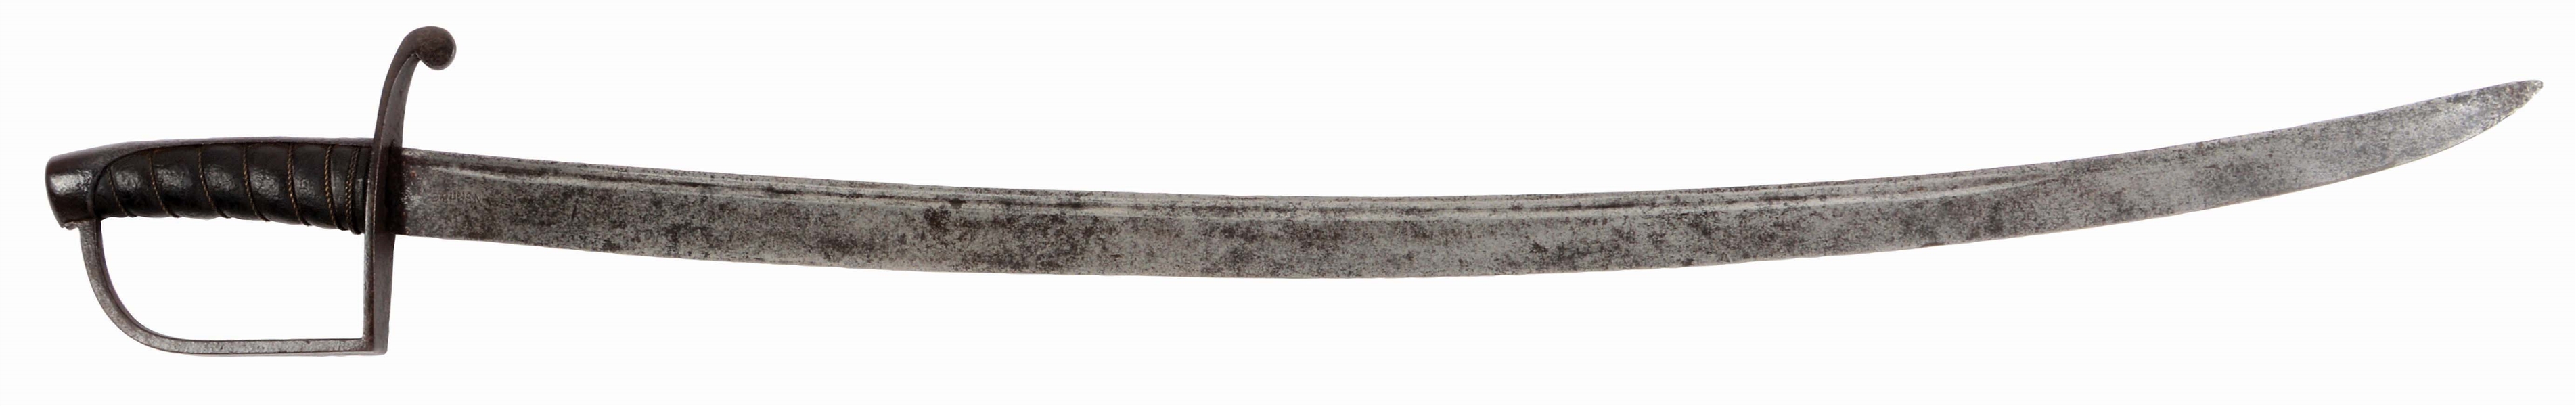 RARE US MODEL 1798 CONTRACT CAVALRY SABER BY STARR, DATED 1799.